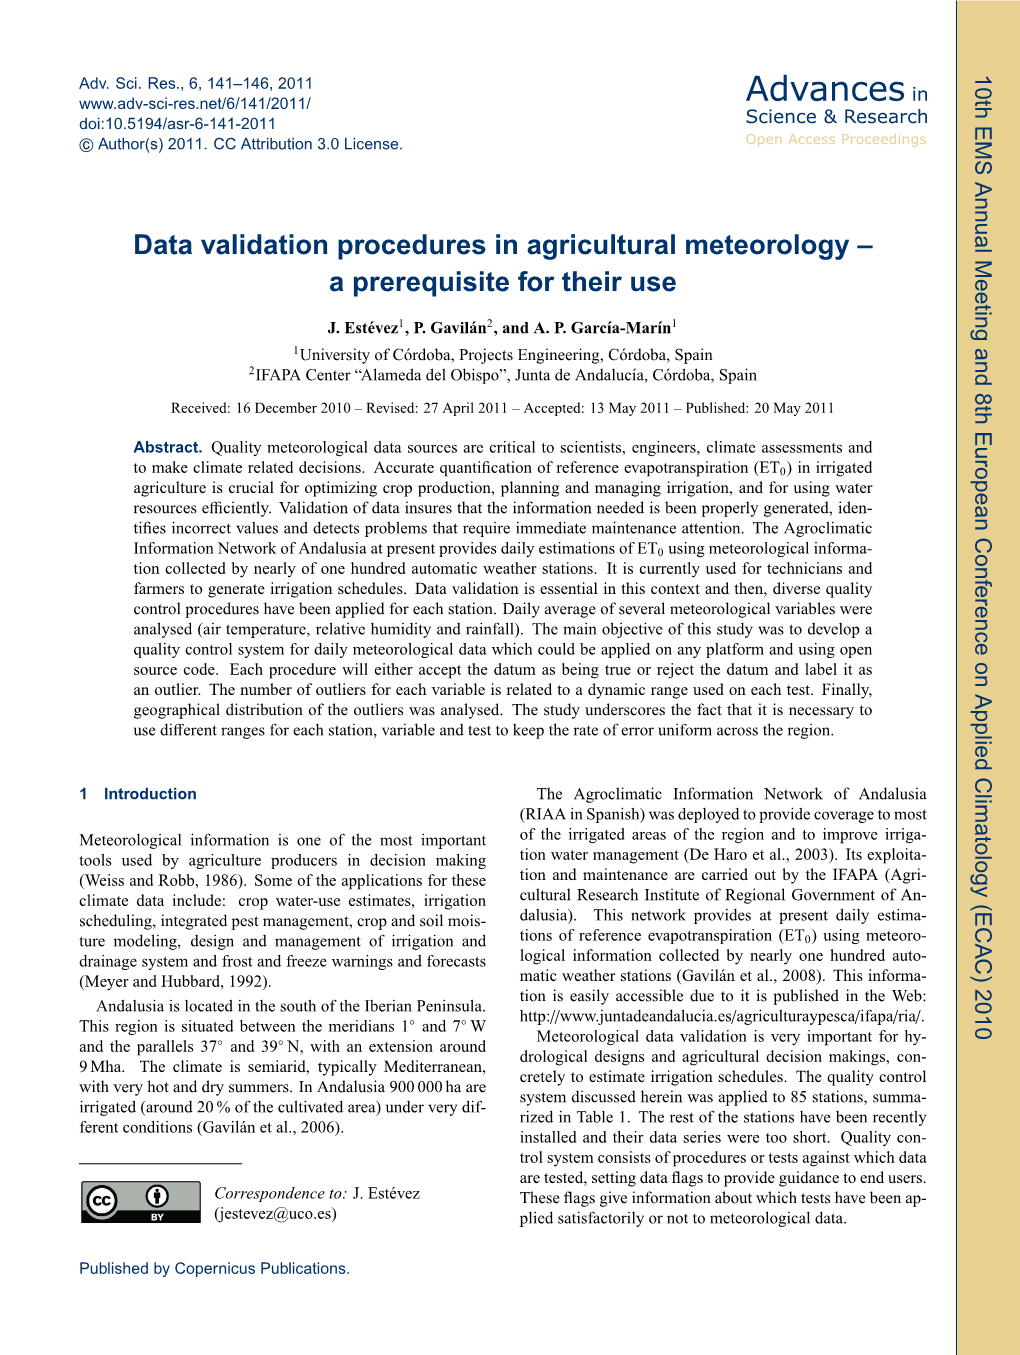 Data Validation Procedures in Agricultural Meteorology–A